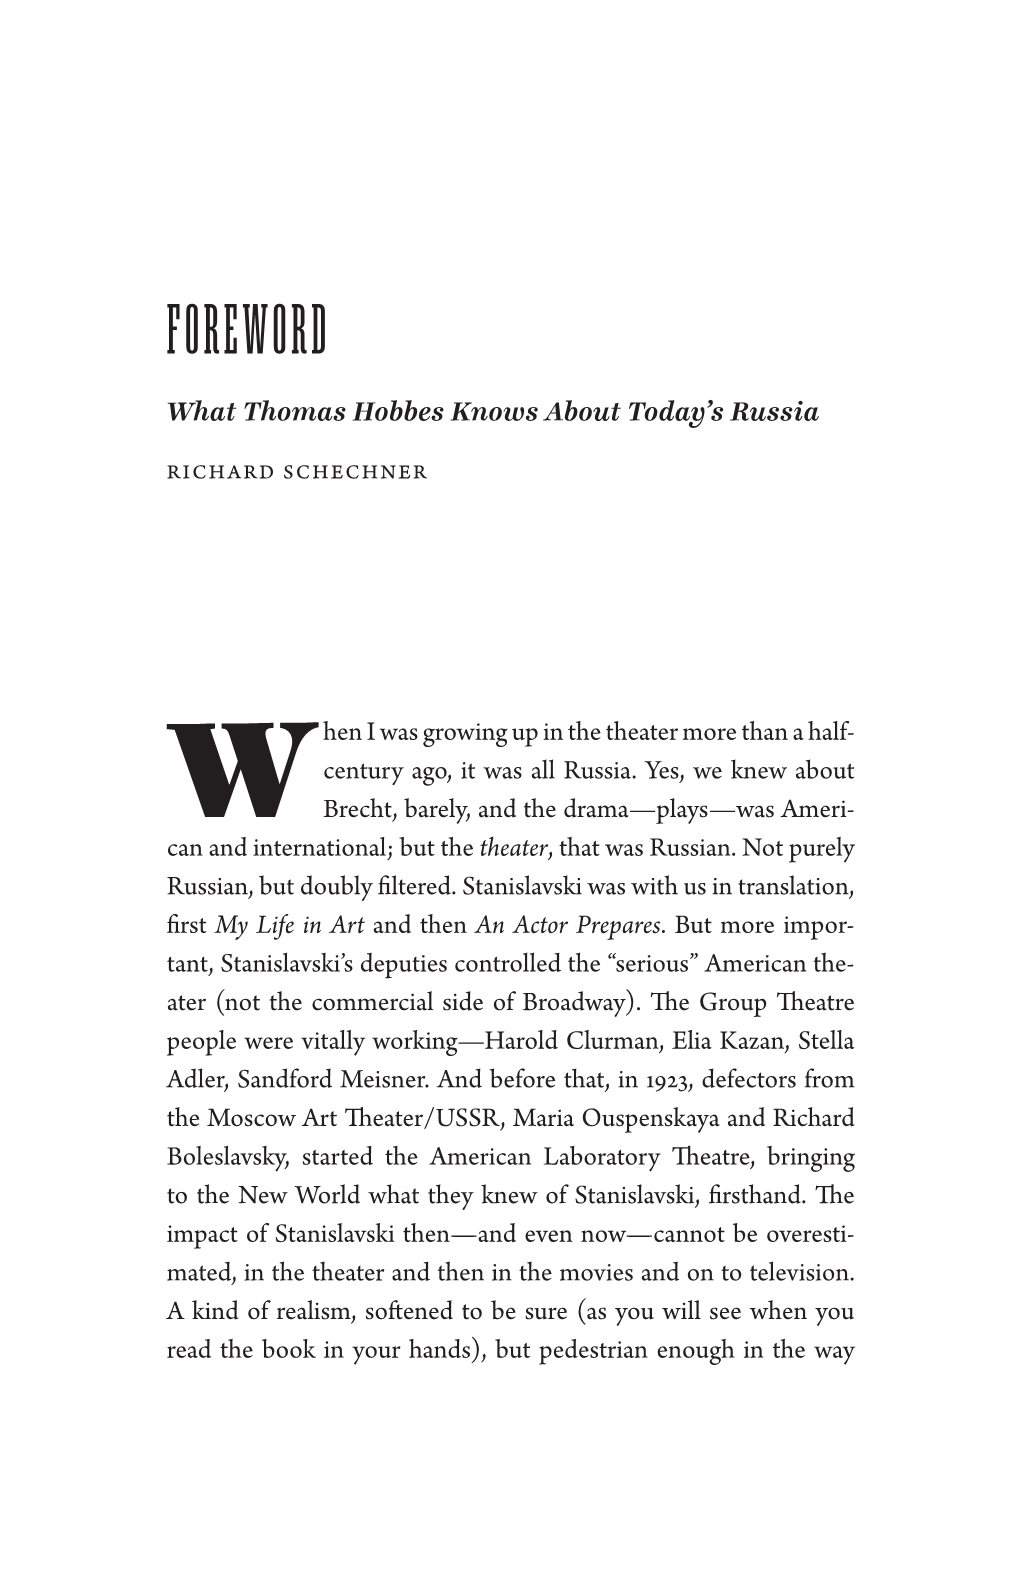 FOREWORD. What Thomas Hobbes Knows About Today's Russia